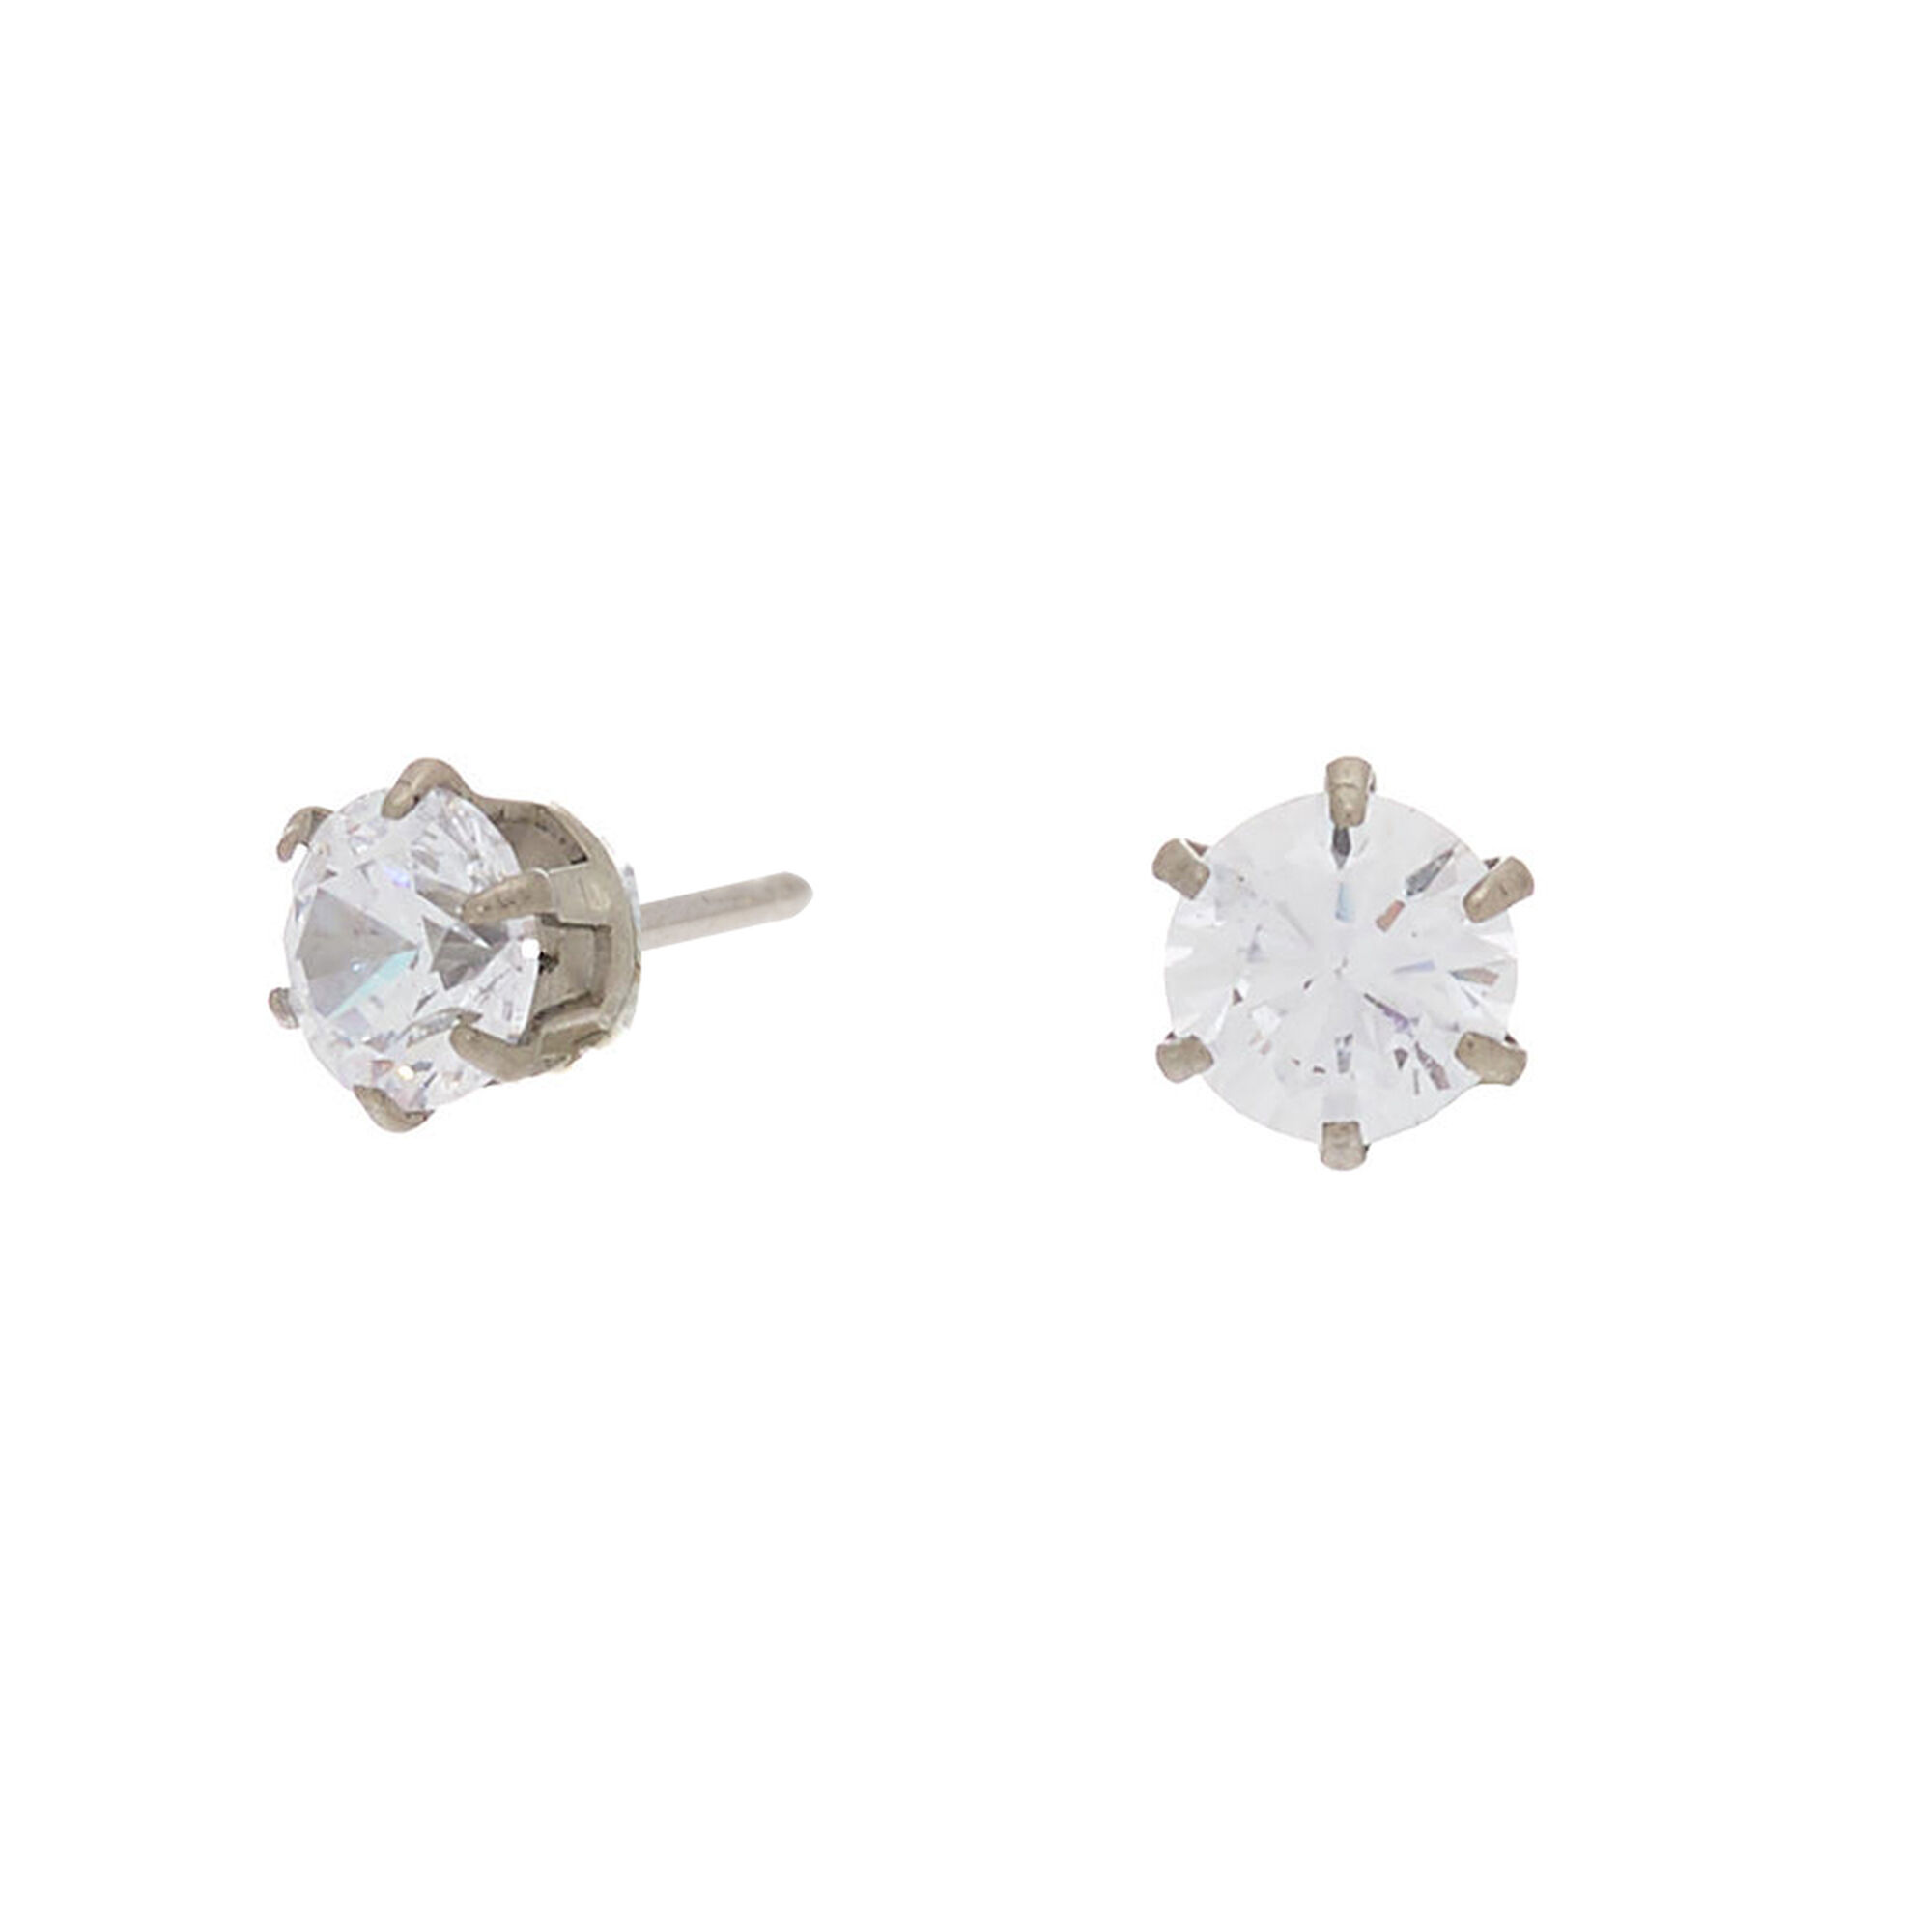 View Claires Titanium Cubic Zirconia 4MM Round Stud Earrings Silver information